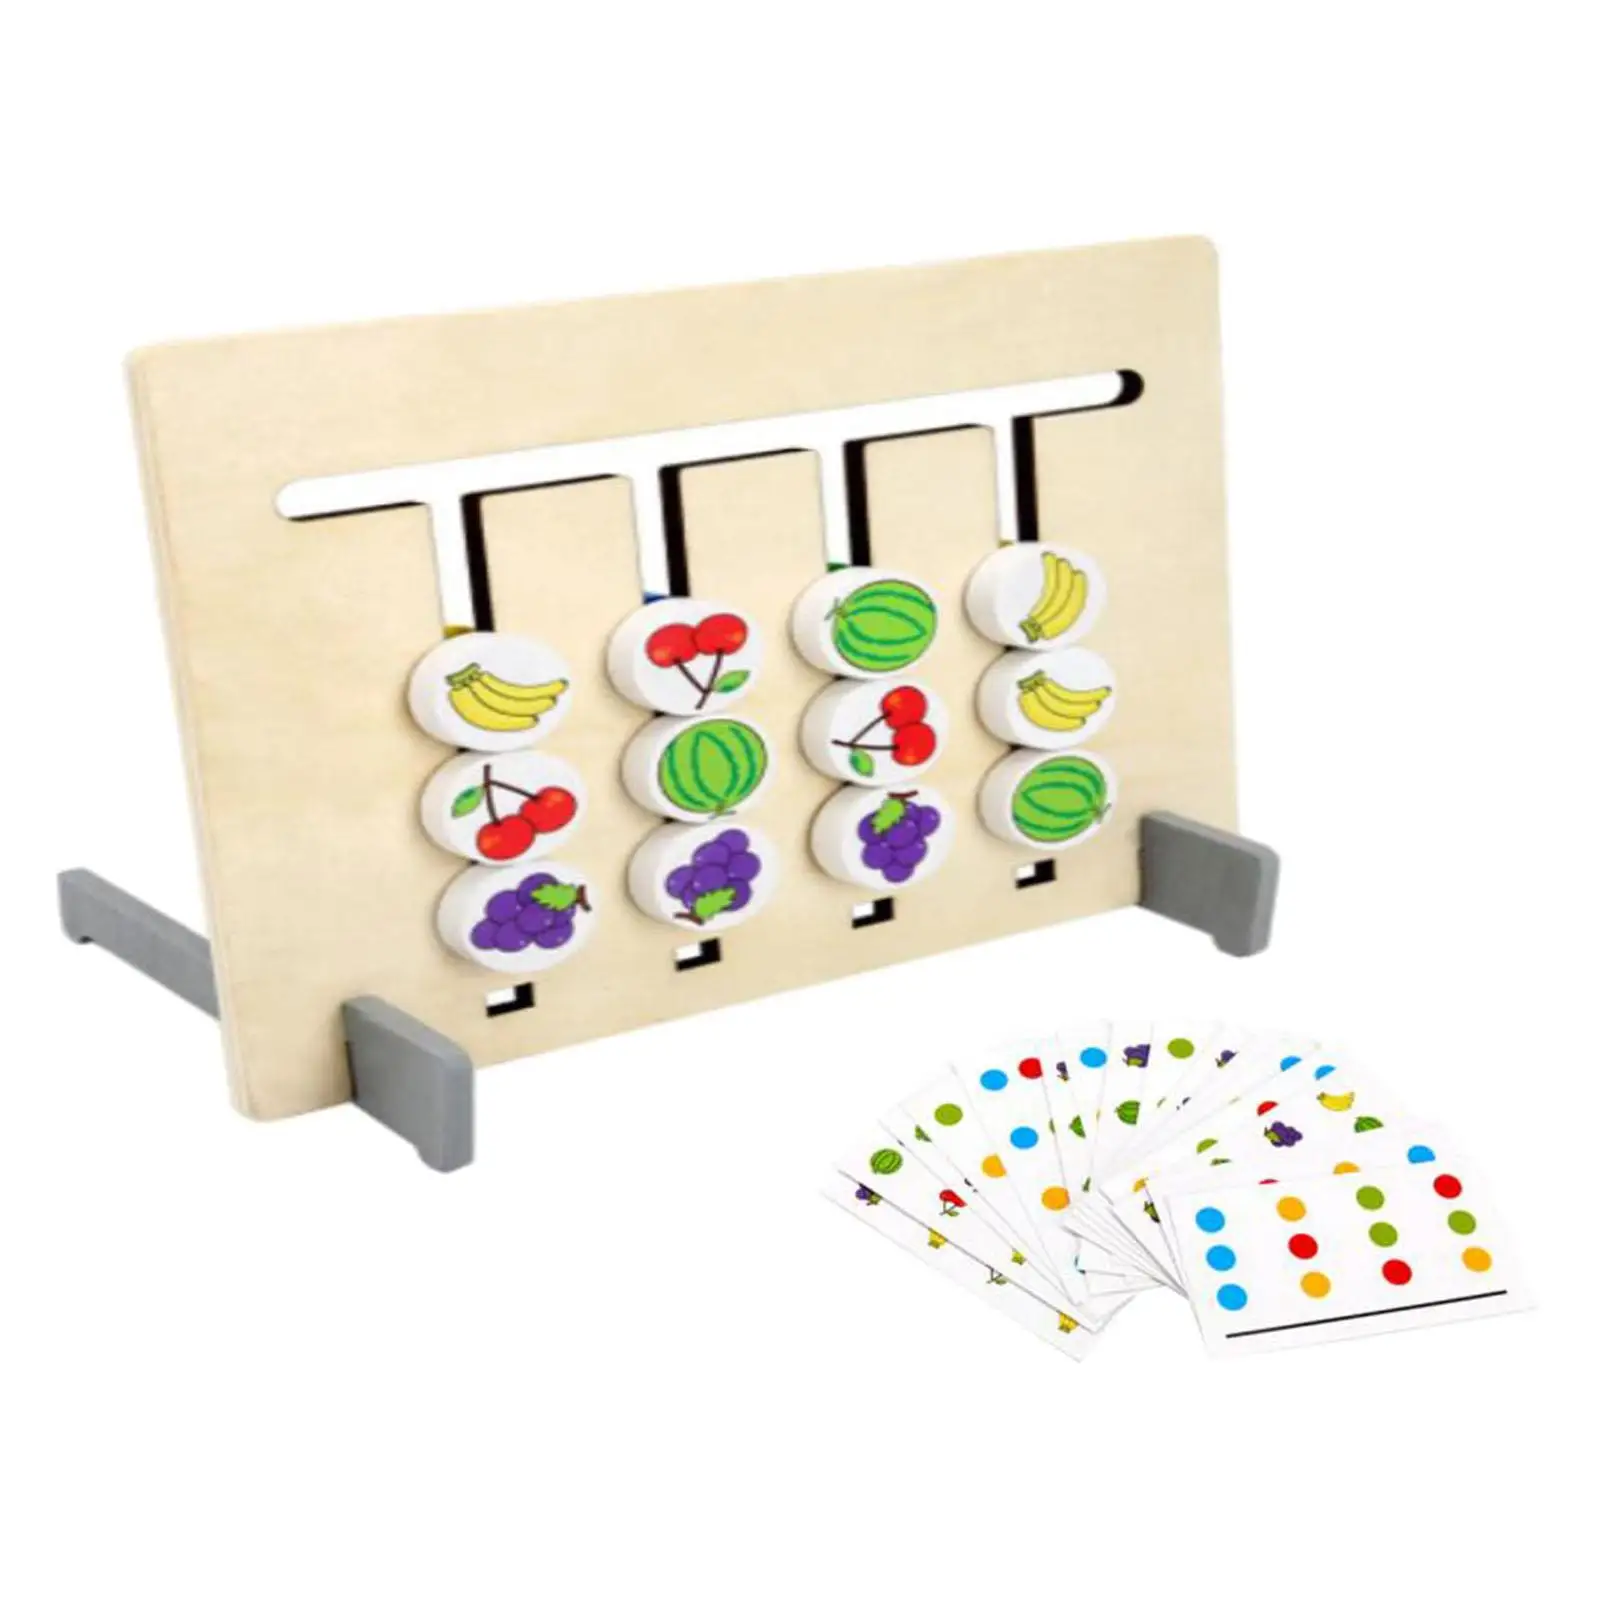 Matching Game Novelty Development Toys Birthday Gift Teaching Aids Cognitive